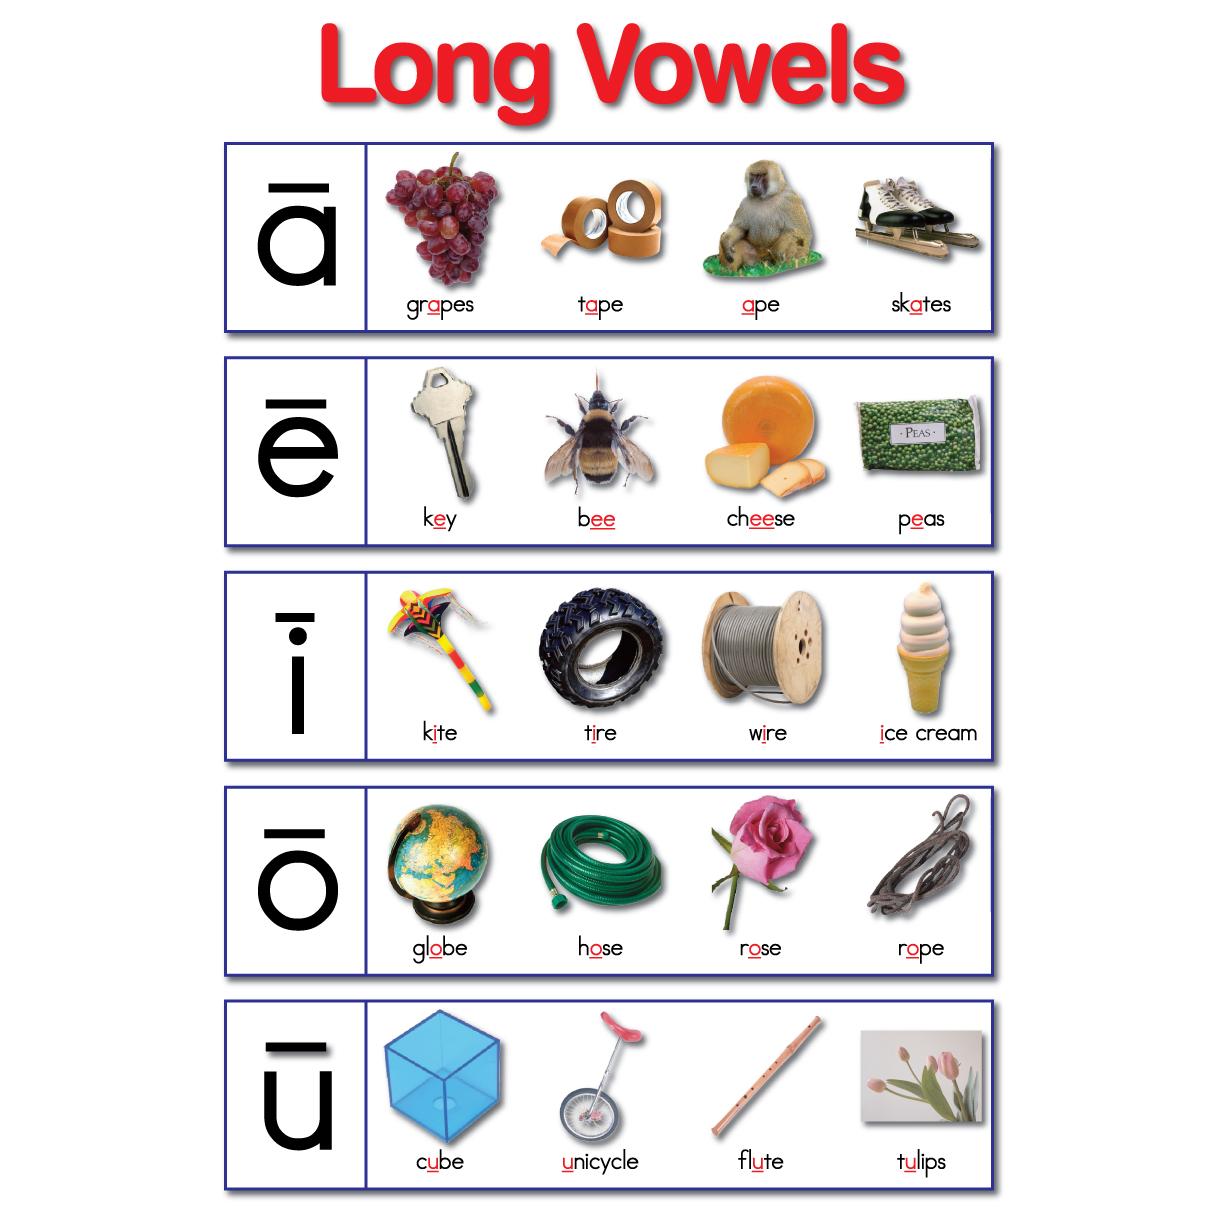 long-vowels-educational-laminated-chart